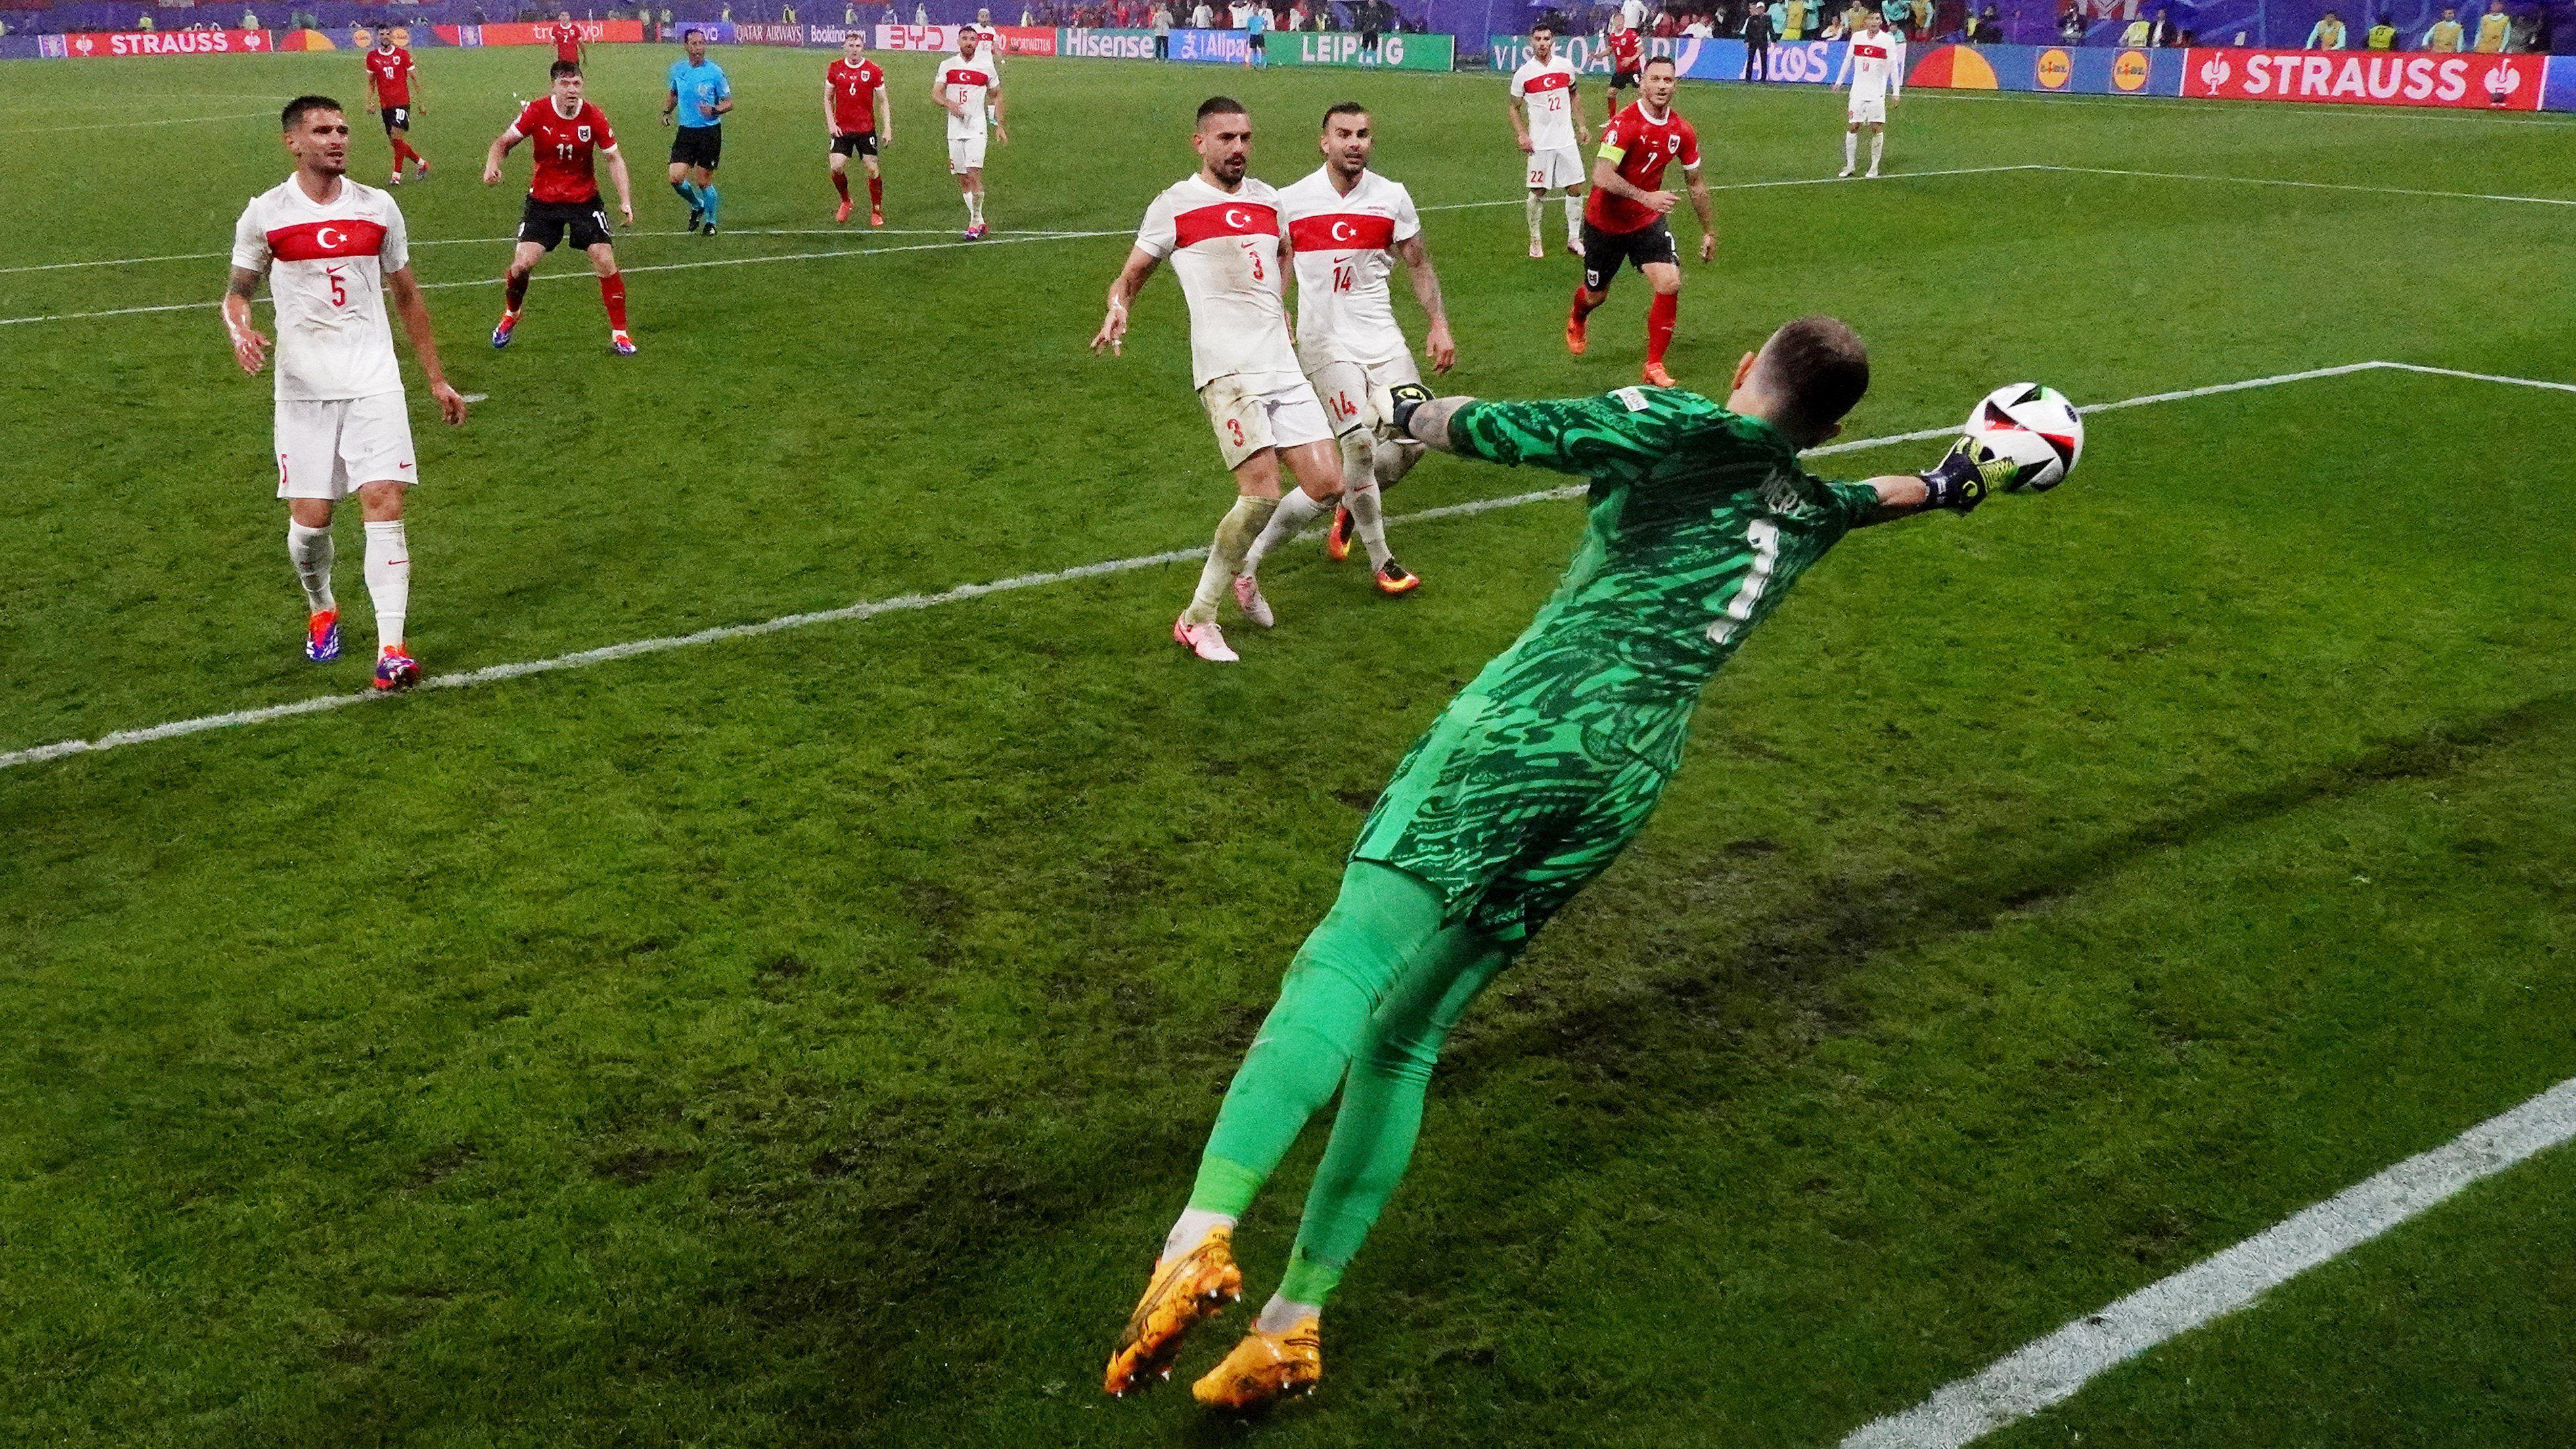 'Banks replica' - was this 'one of great saves in Euros history'?